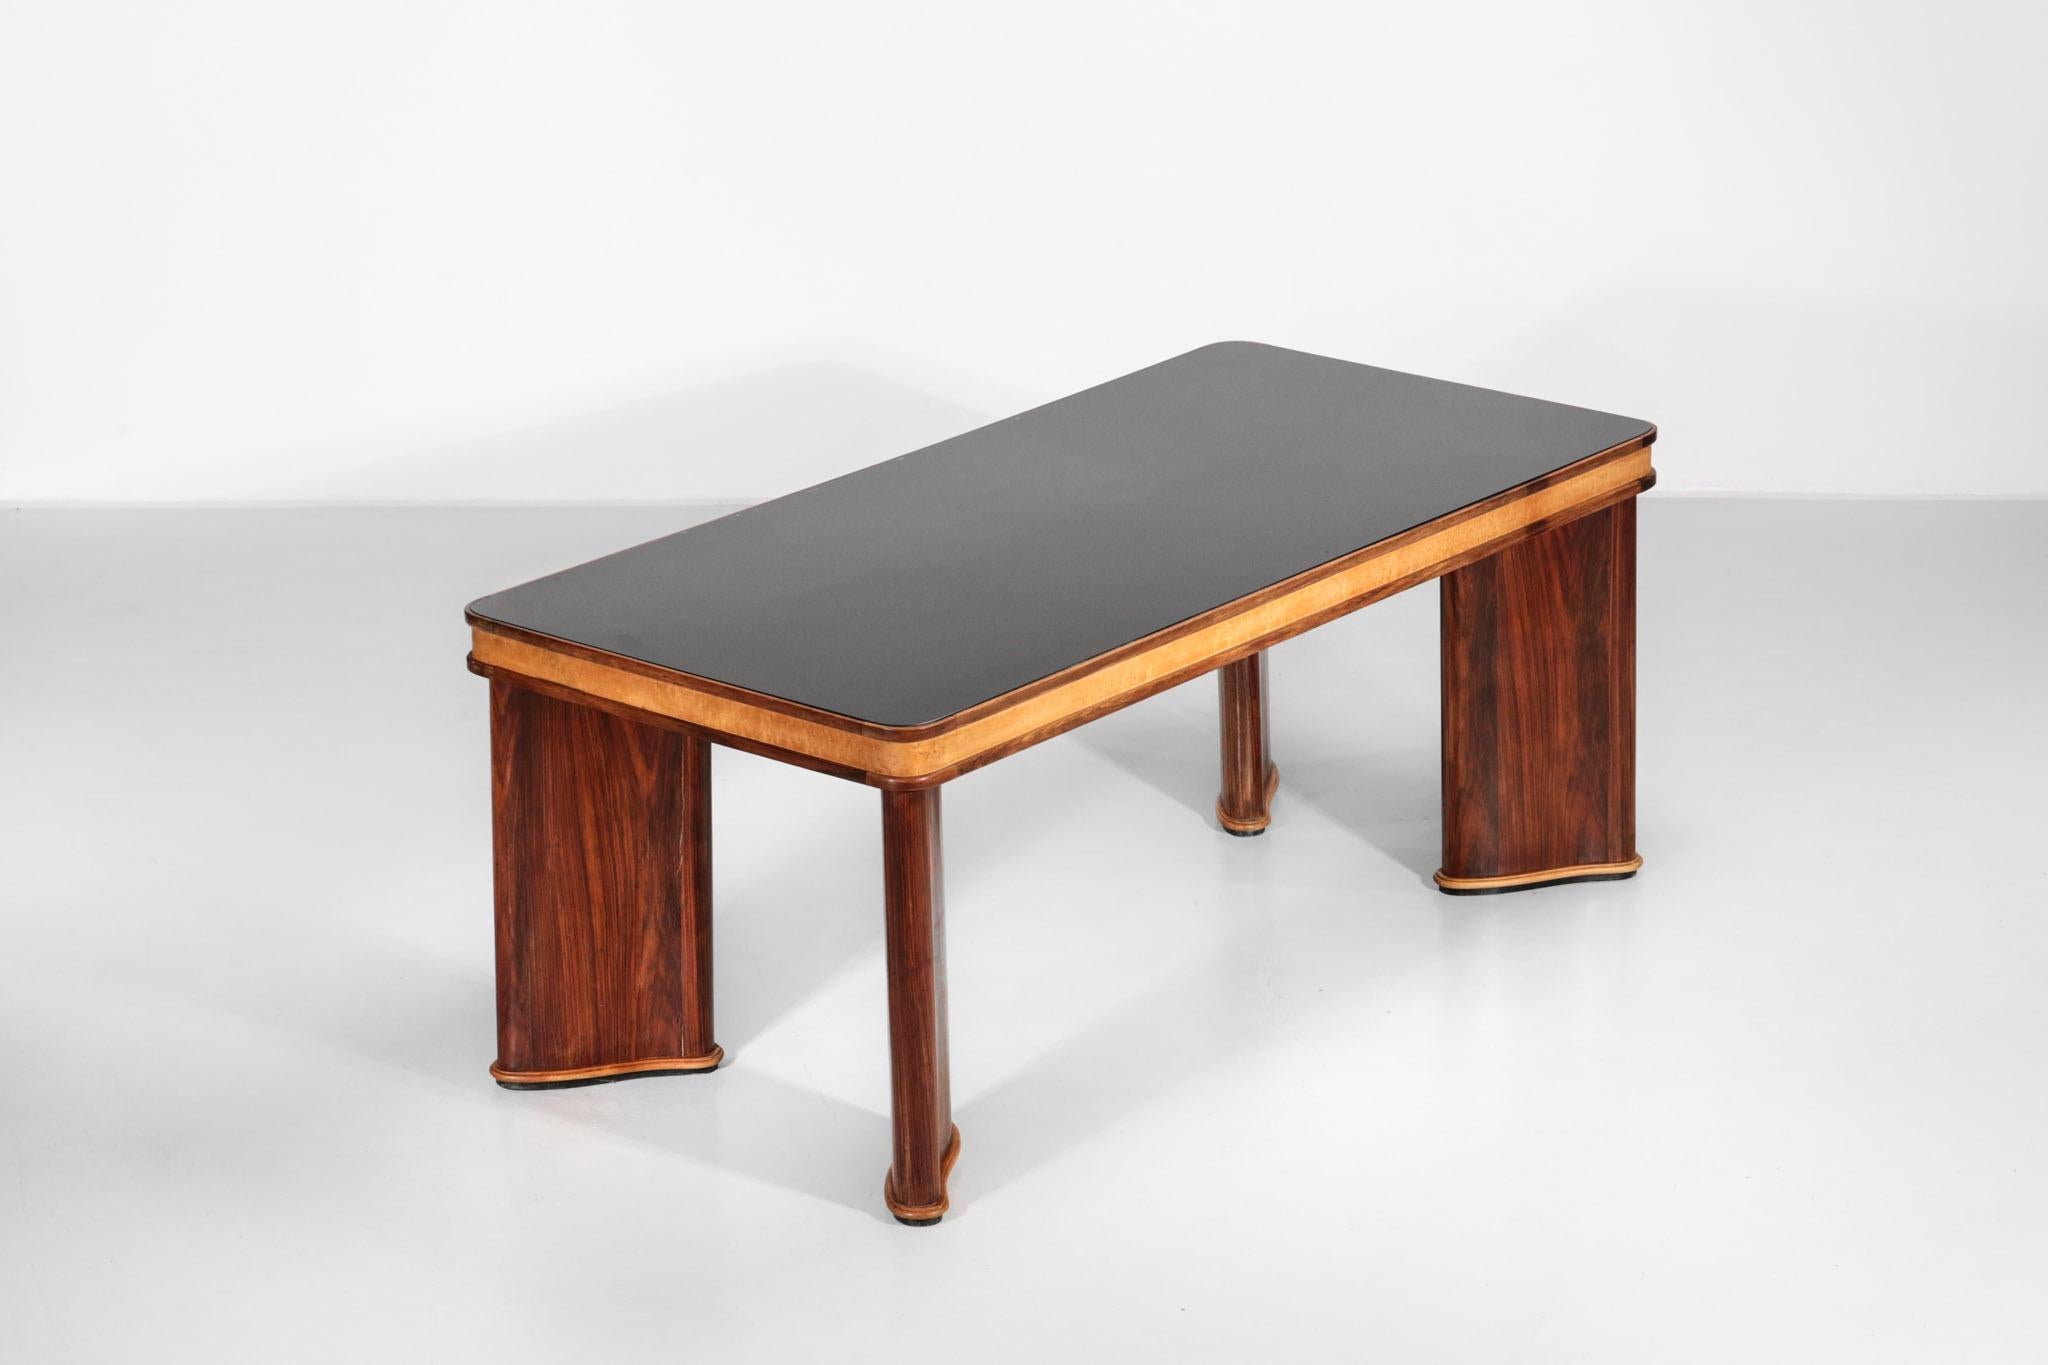 Dining table from 1950s attributed to Osvaldo Borsani.
Top in glass with a wood structure.
Nice design of the leg.